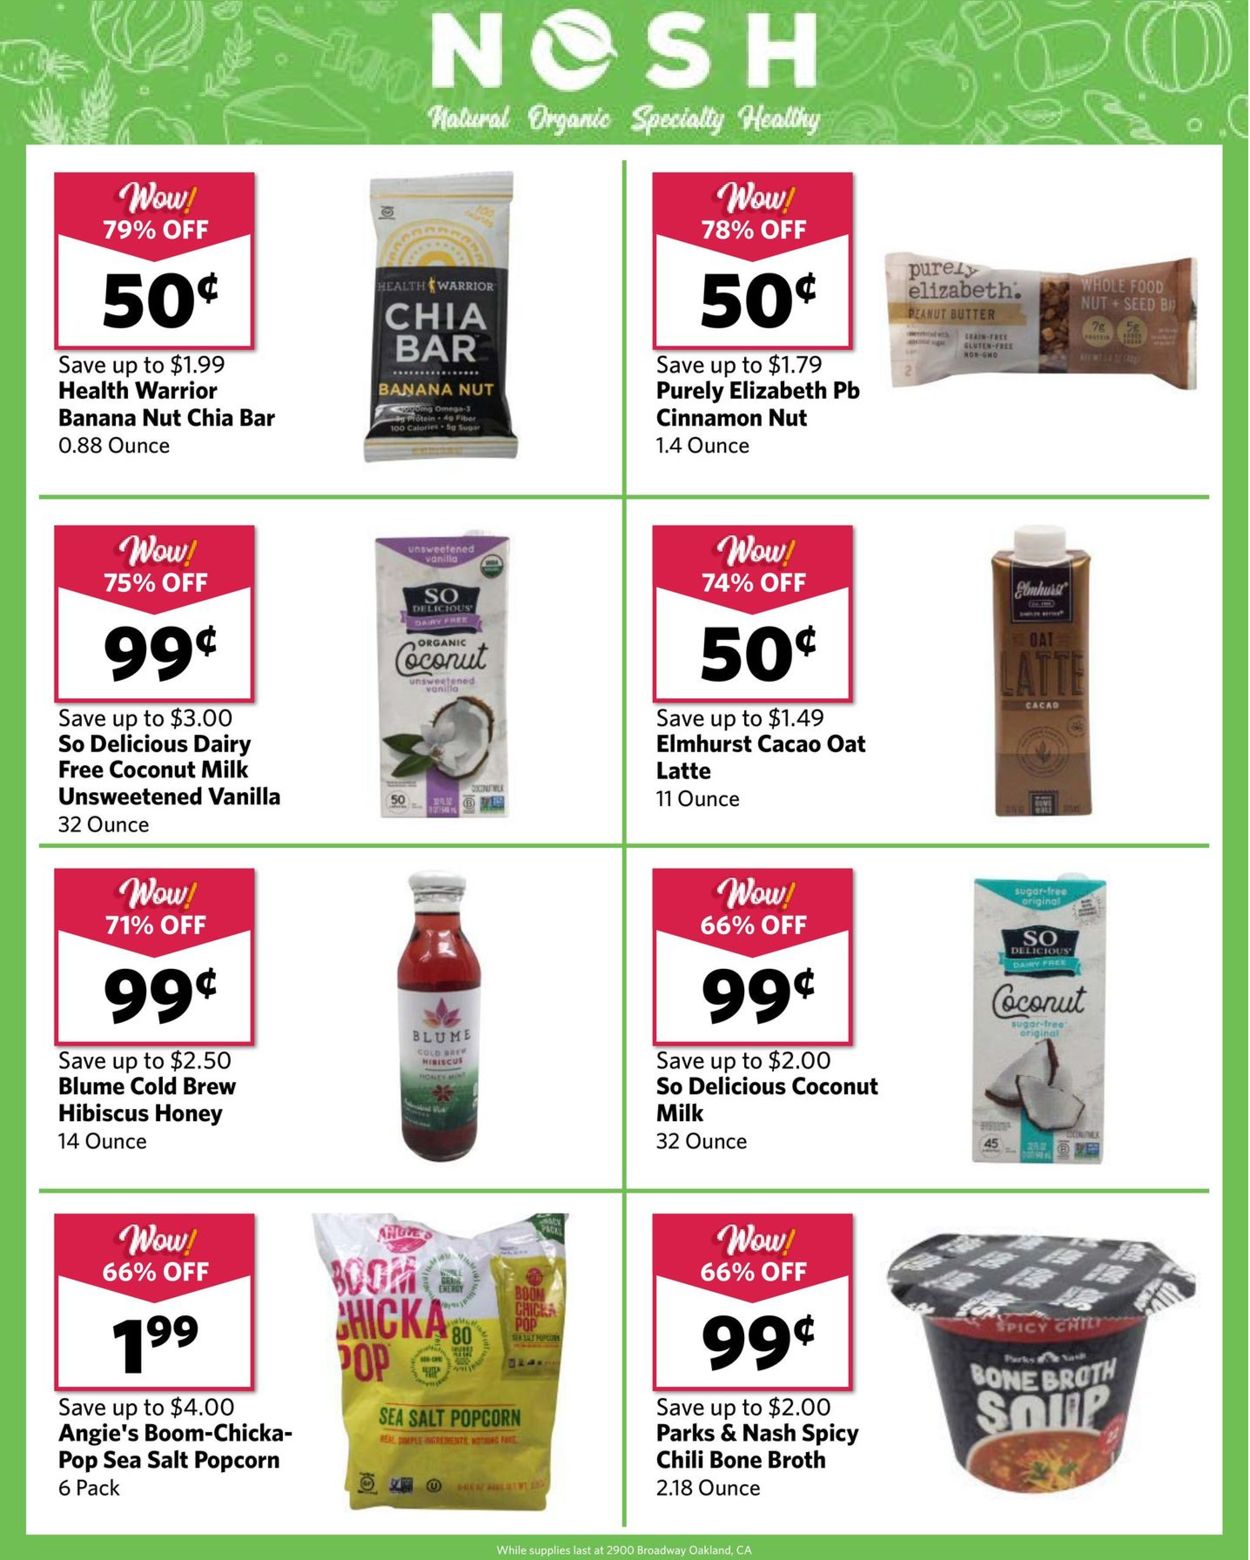 Grocery Outlet Ad from 09/30/2020